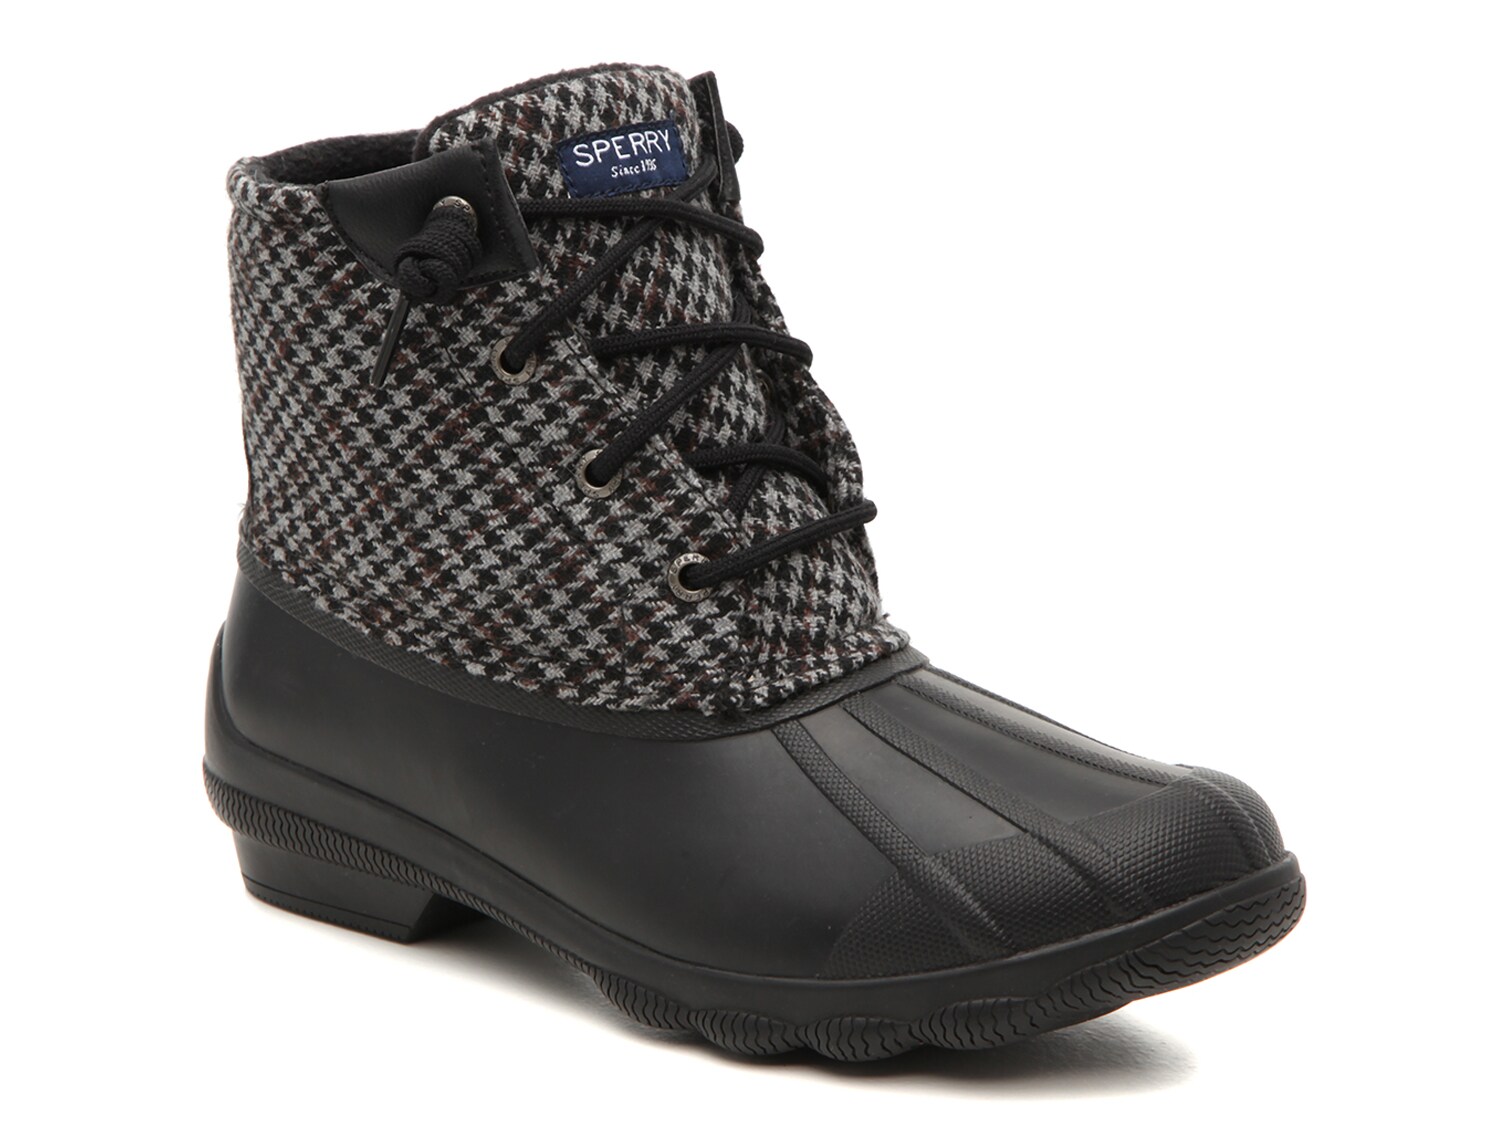 gray and black sperry duck boots